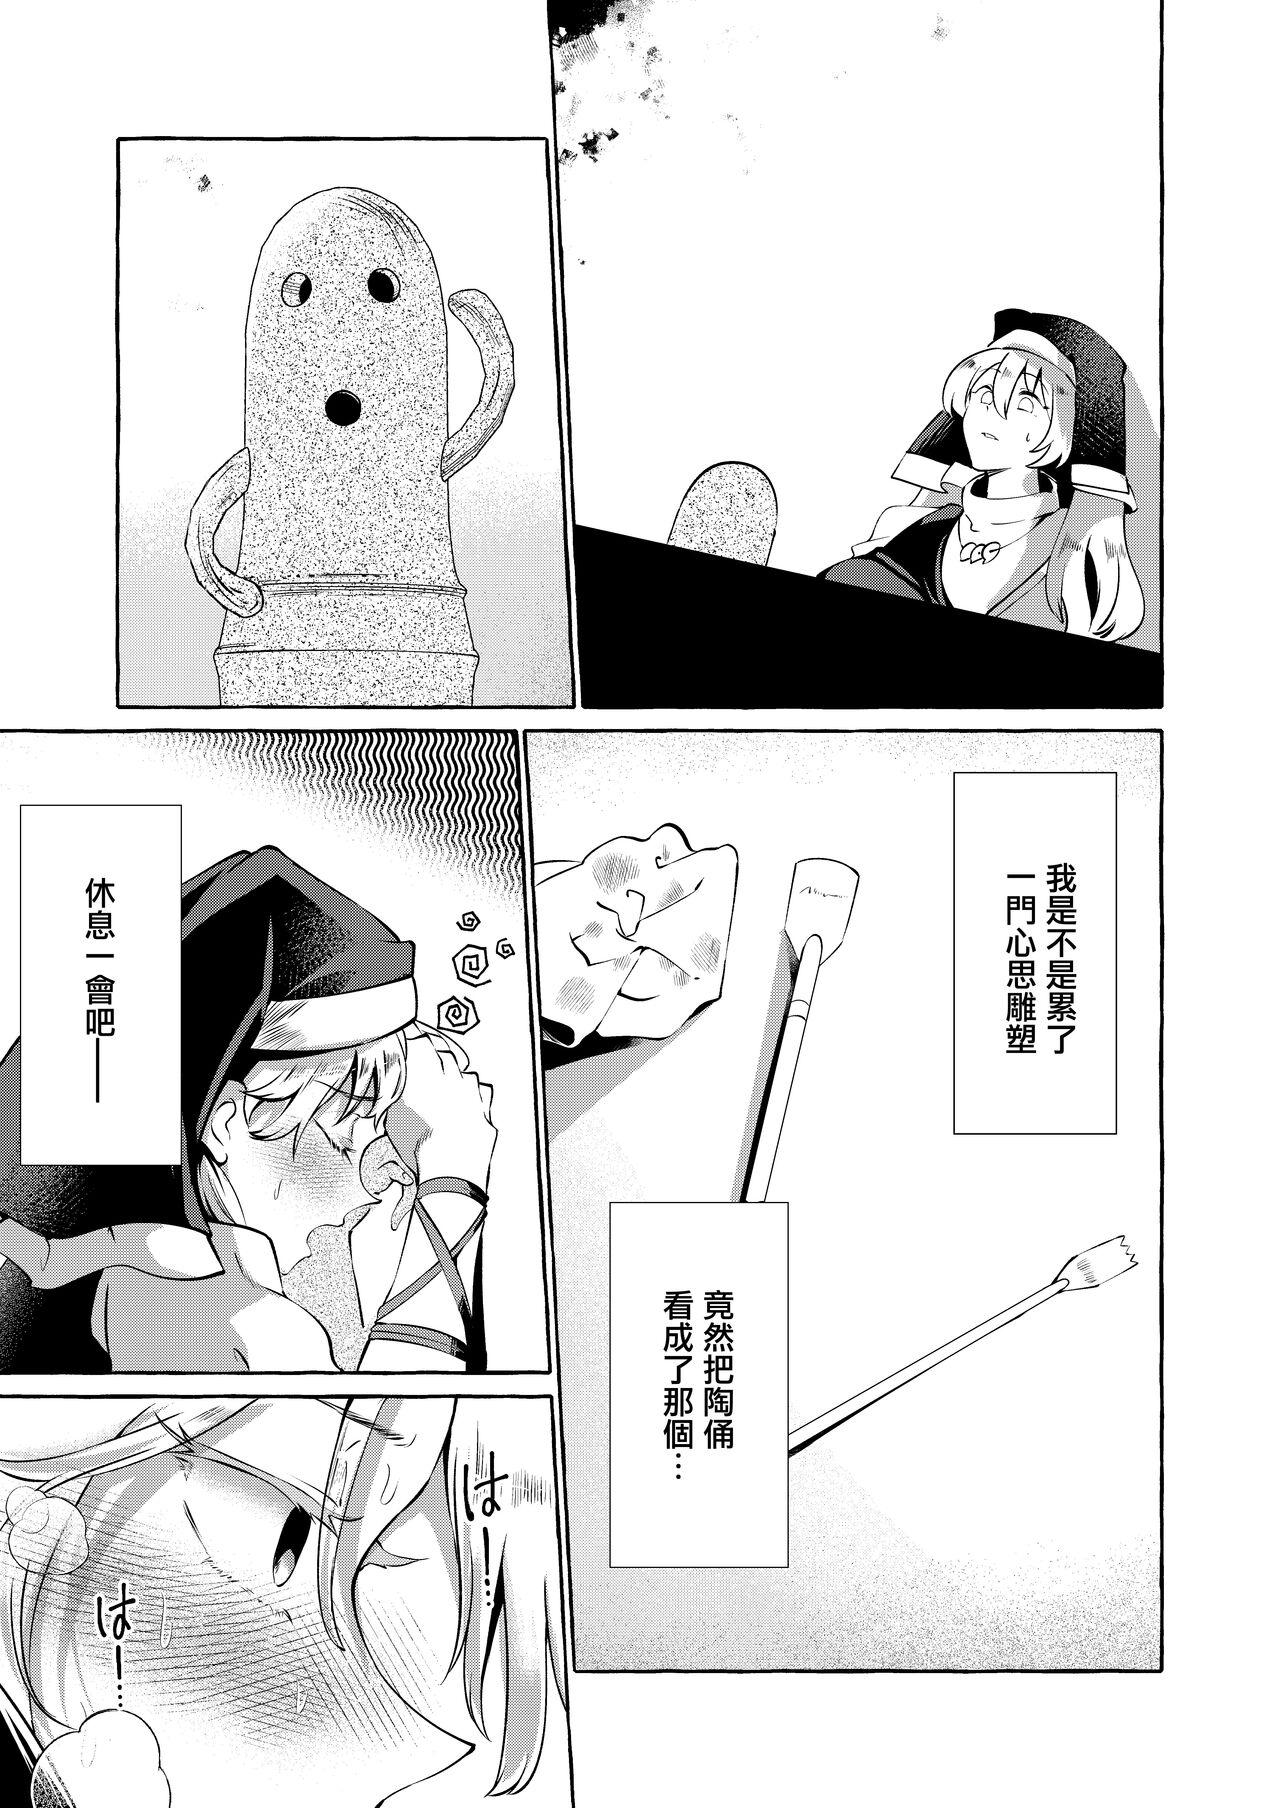 Brother 妄想に肢体を委ねて - Touhou project Real Amature Porn - Page 4